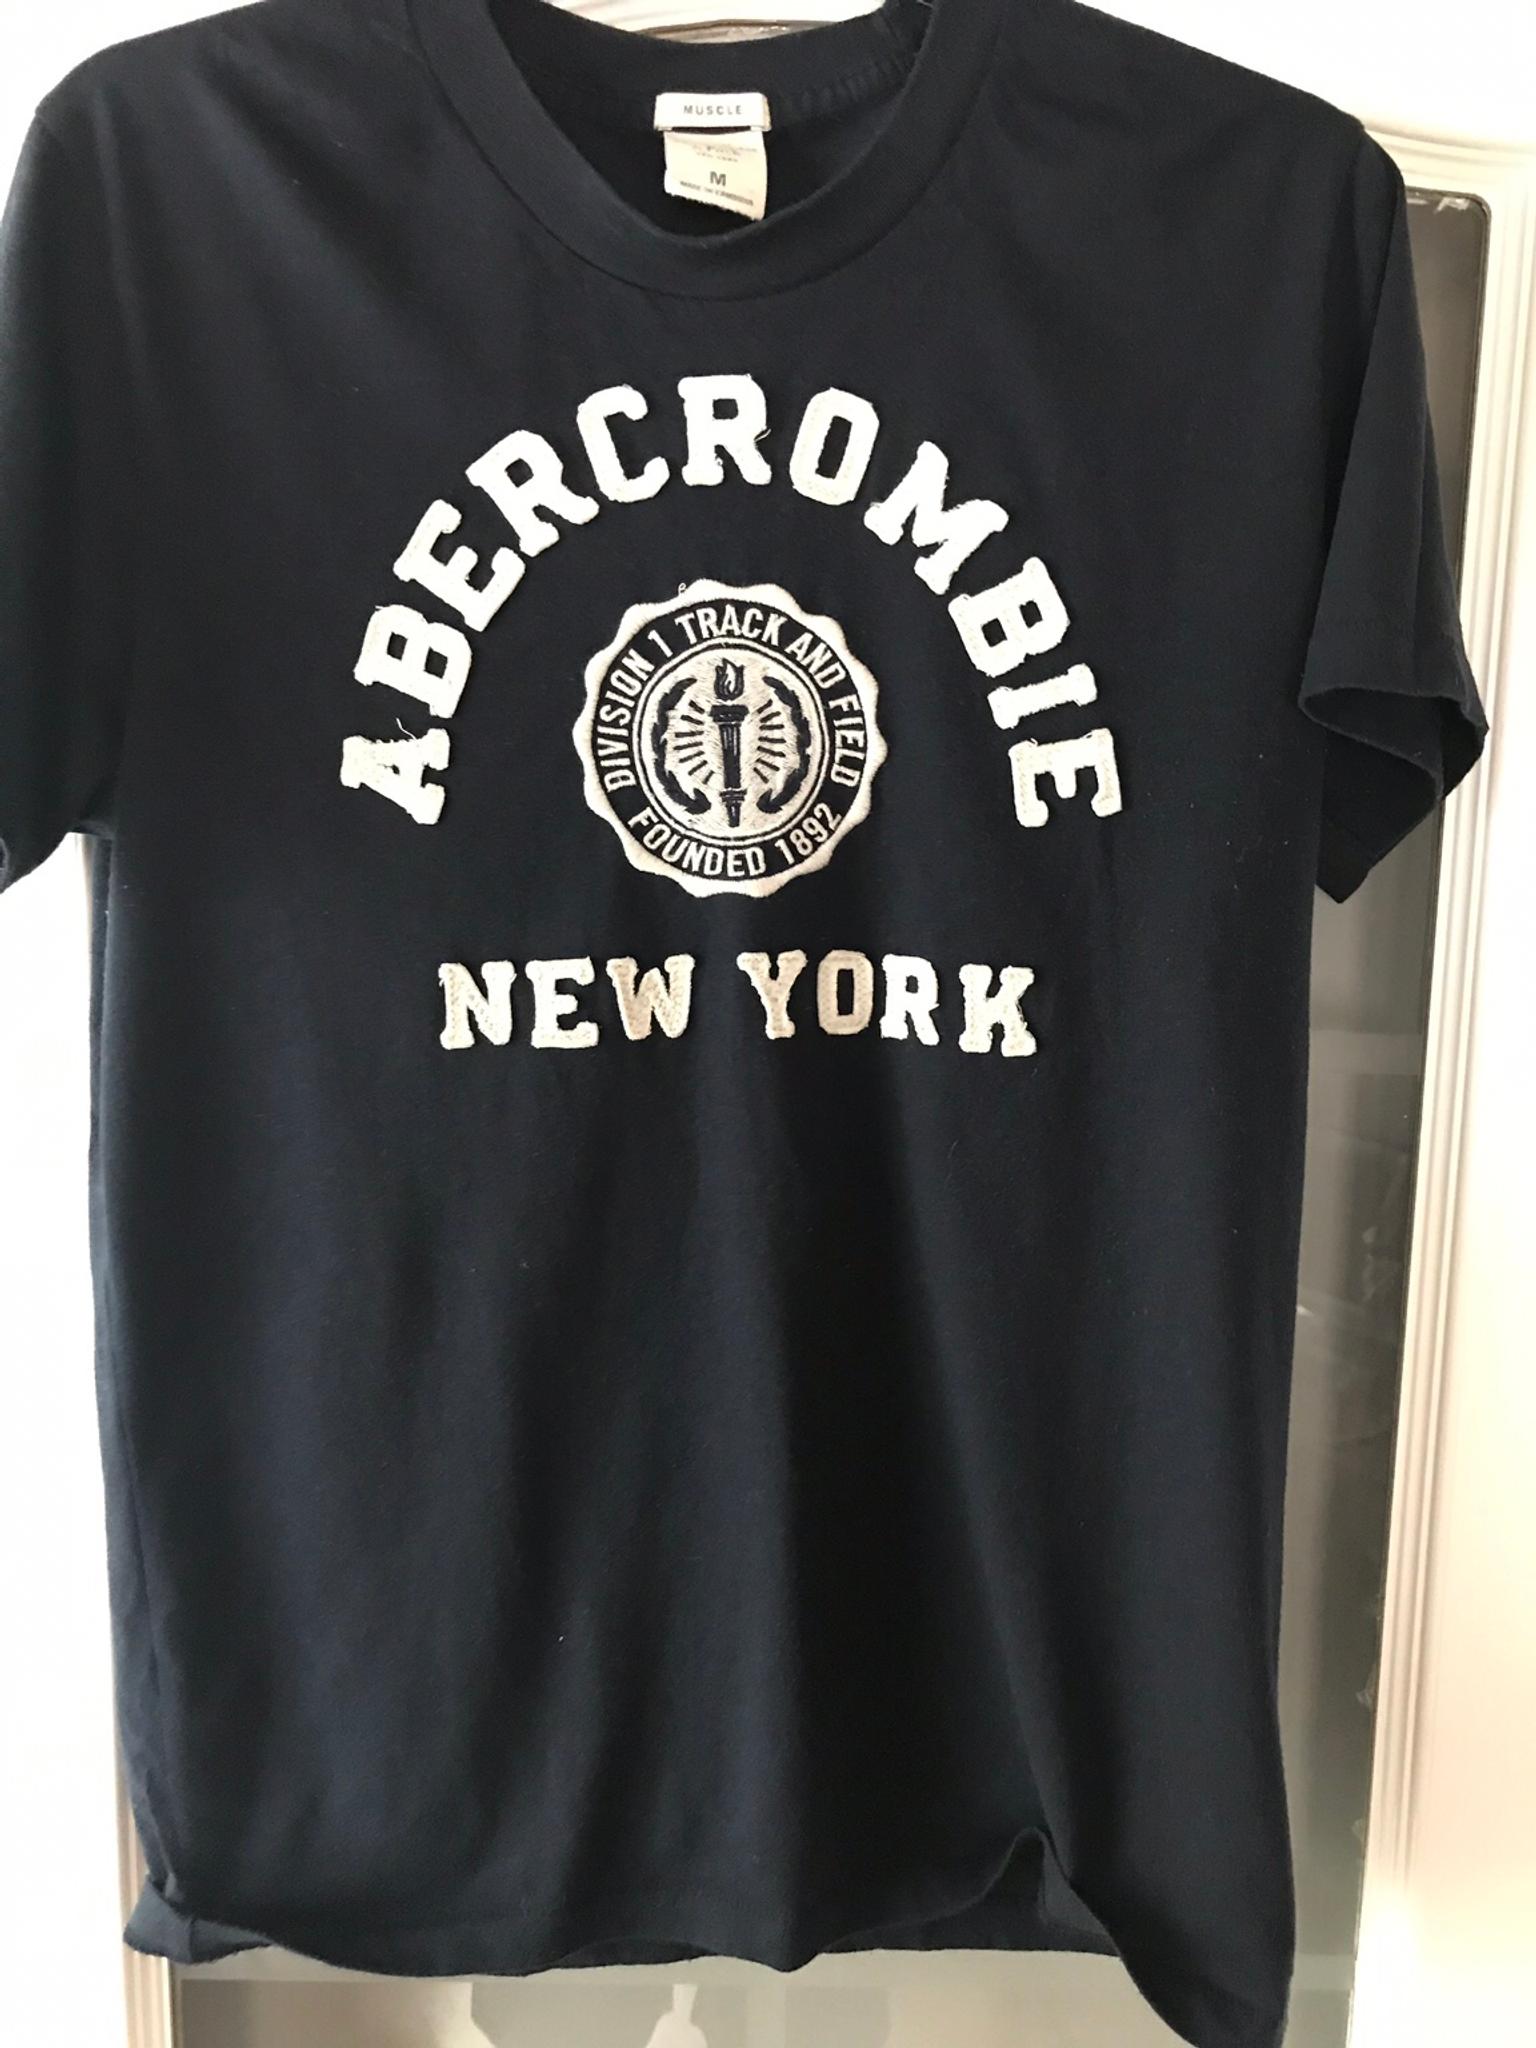 abercrombie fitch t-shirts